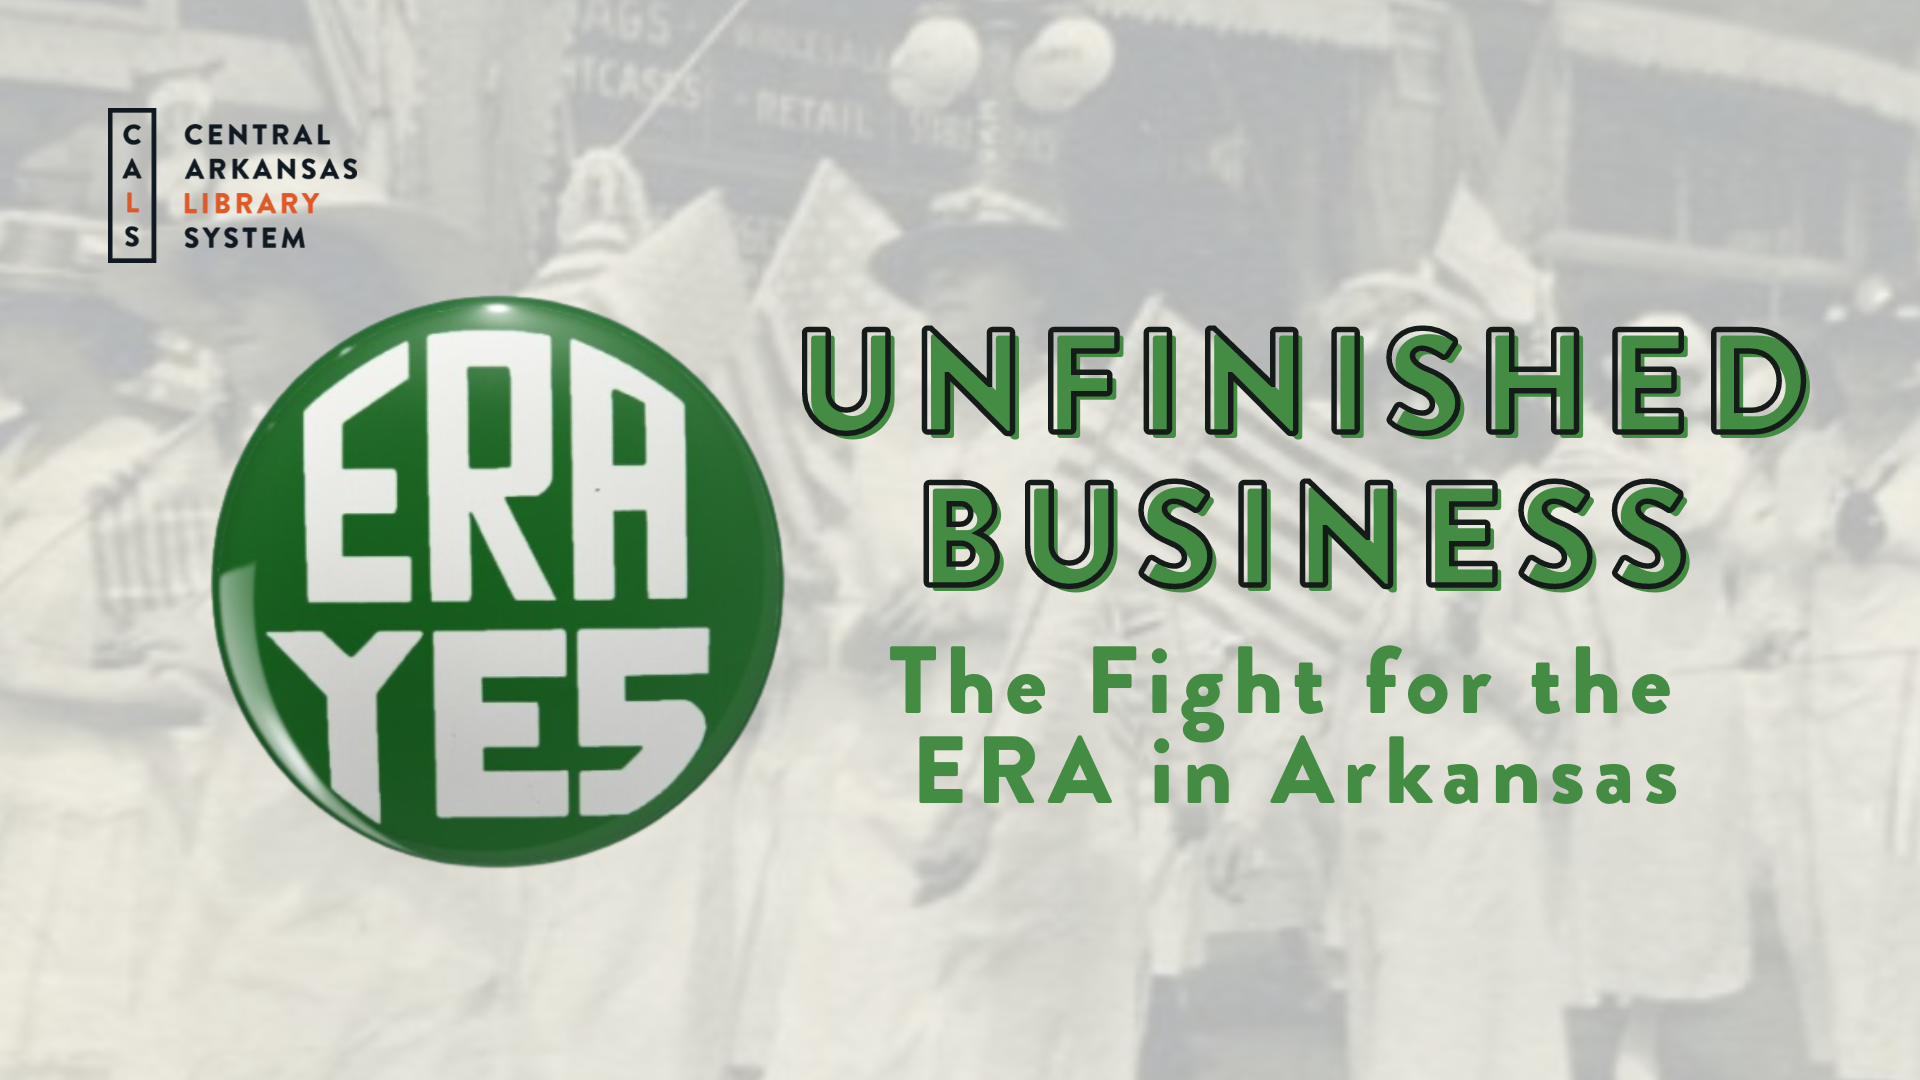 Unfinished Business The Fight for the ERA in Arkansas